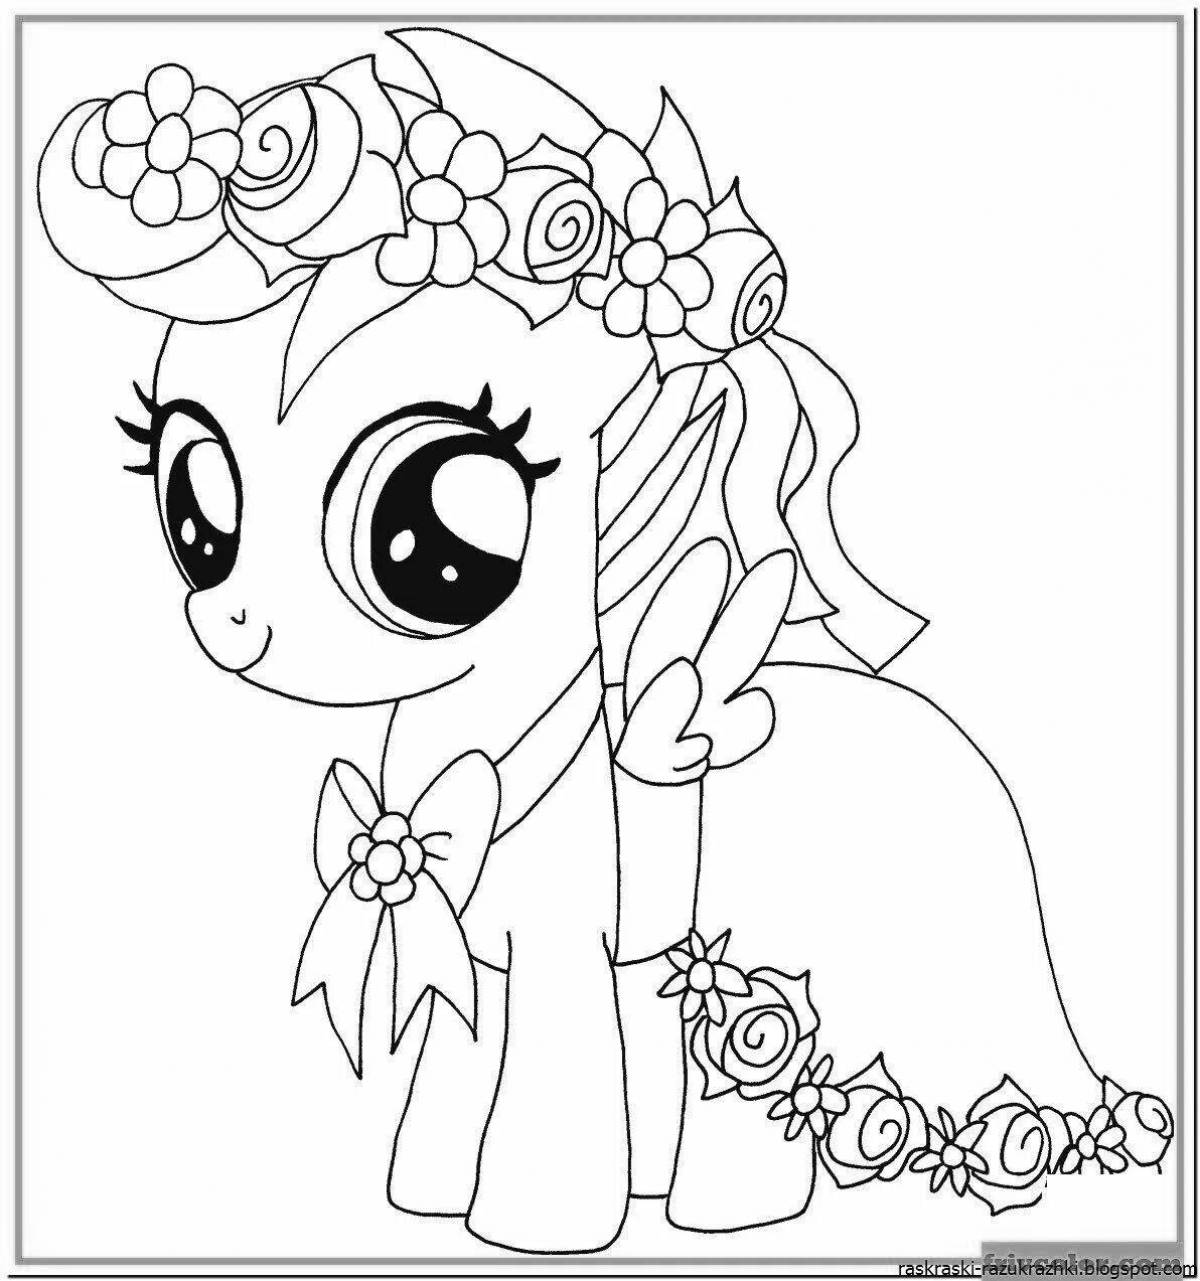 Exotic pony coloring for girls 4-5 years old